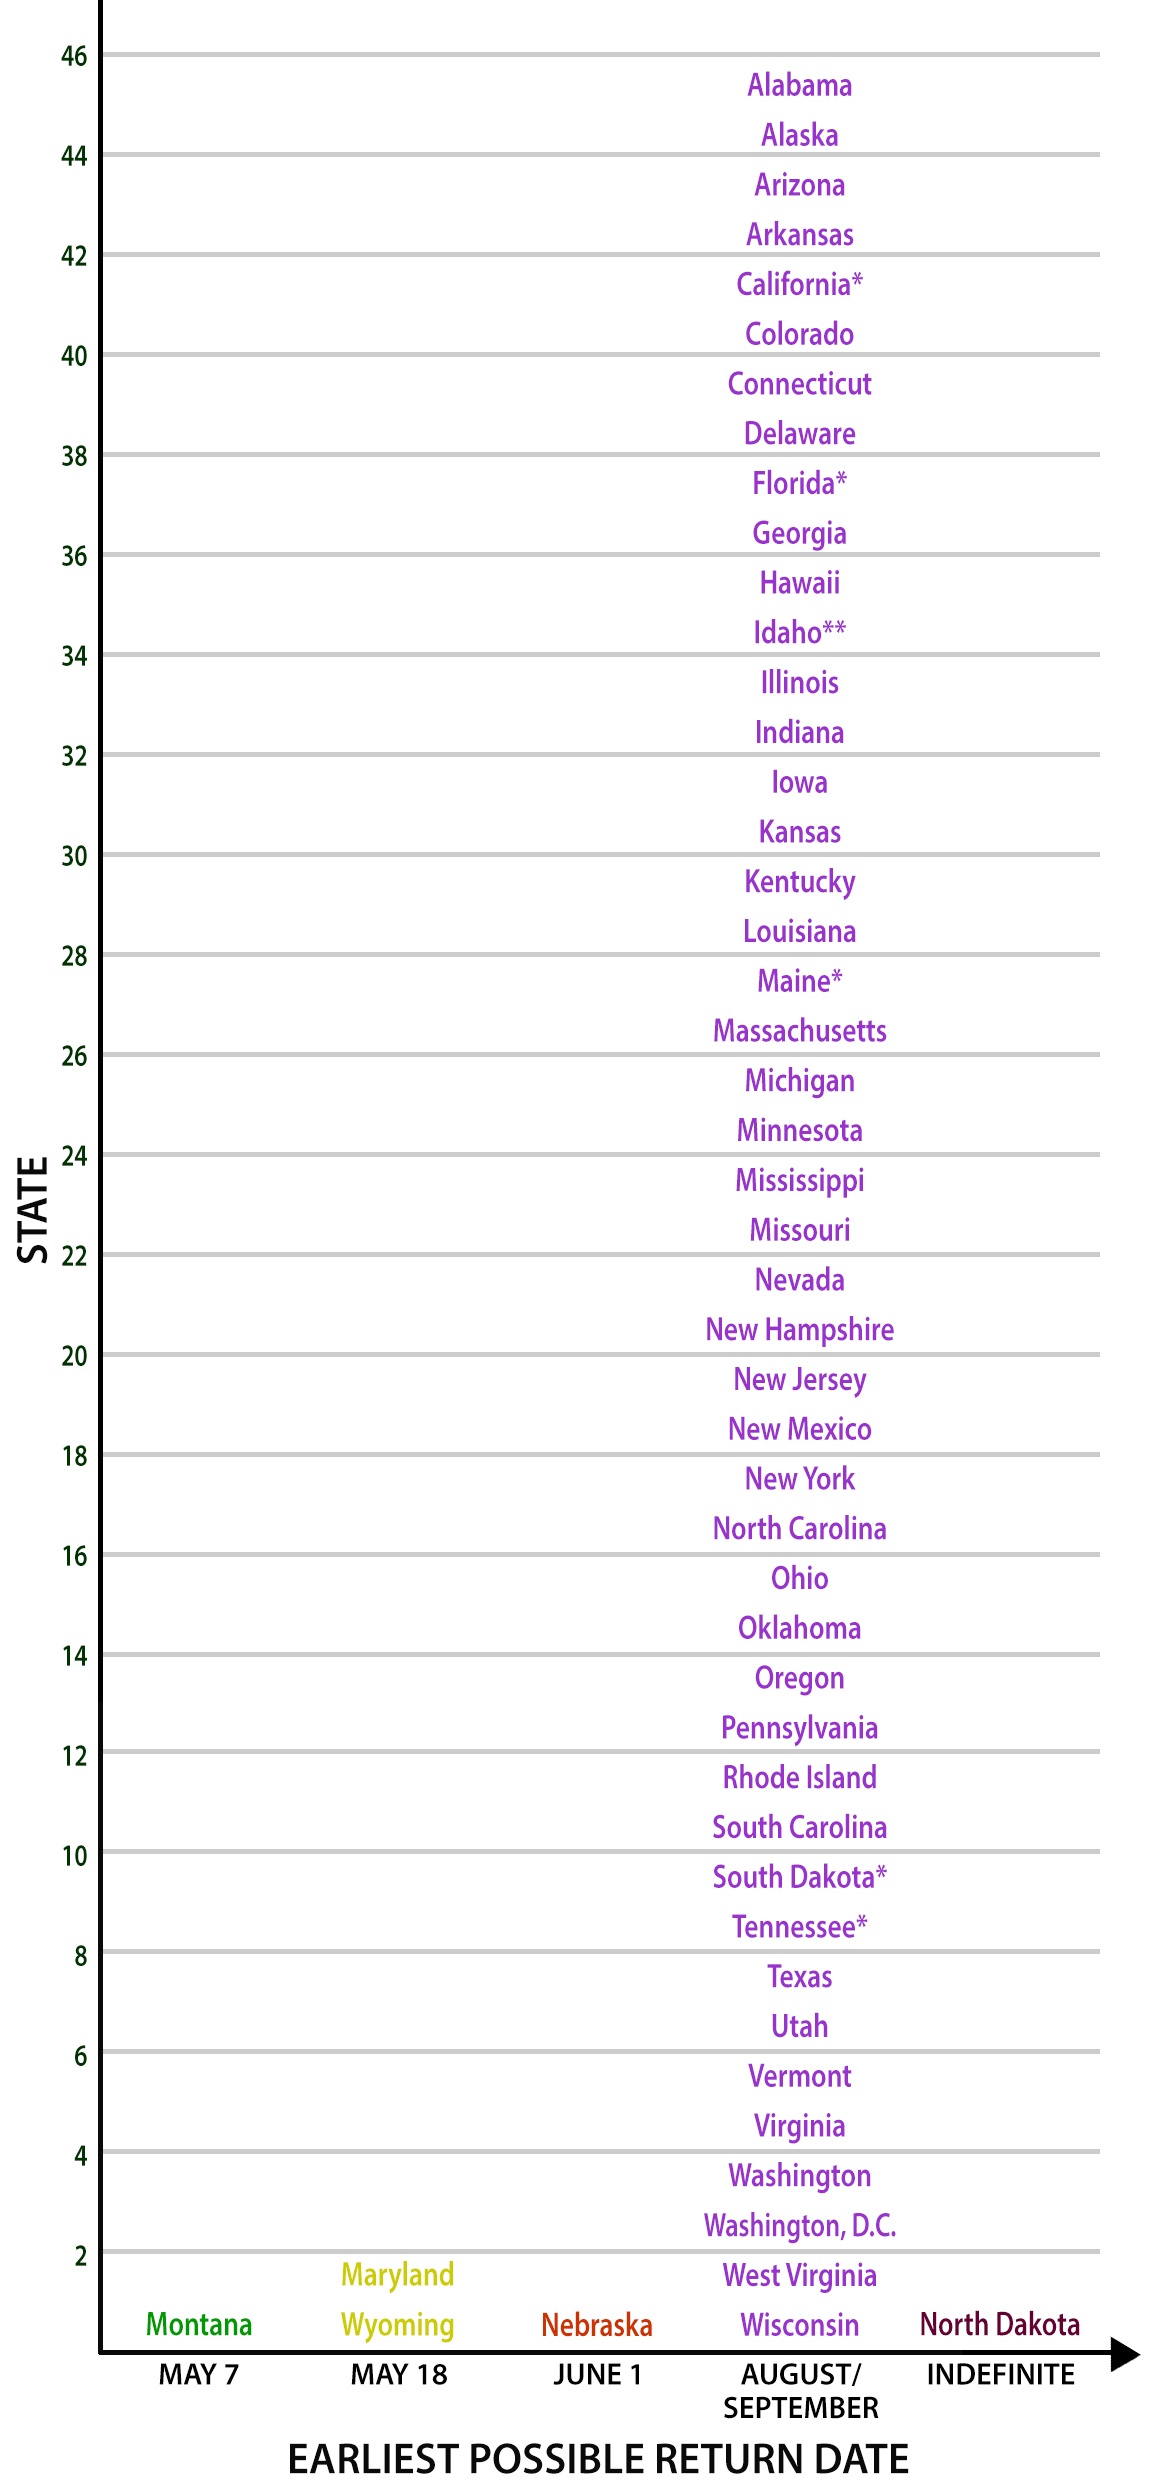 Bar graph depicting the earliest possible return date for schools shut by Covid-19, by state